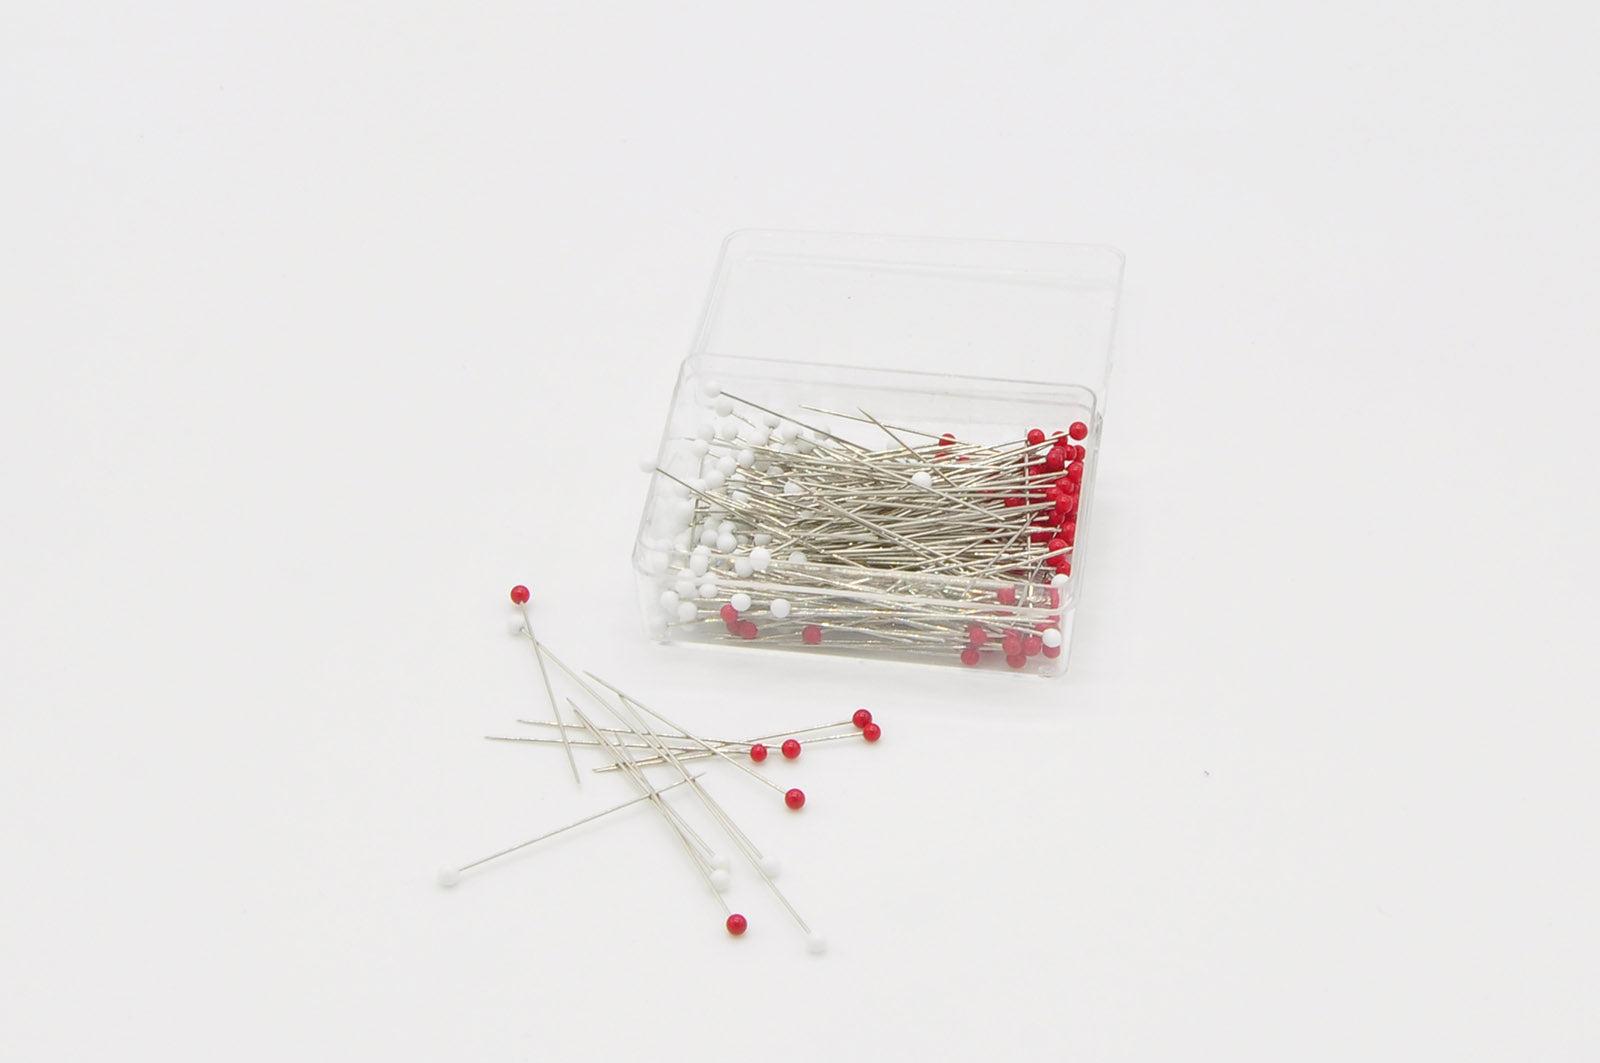 Glass Head Pins - The Sewing Collection